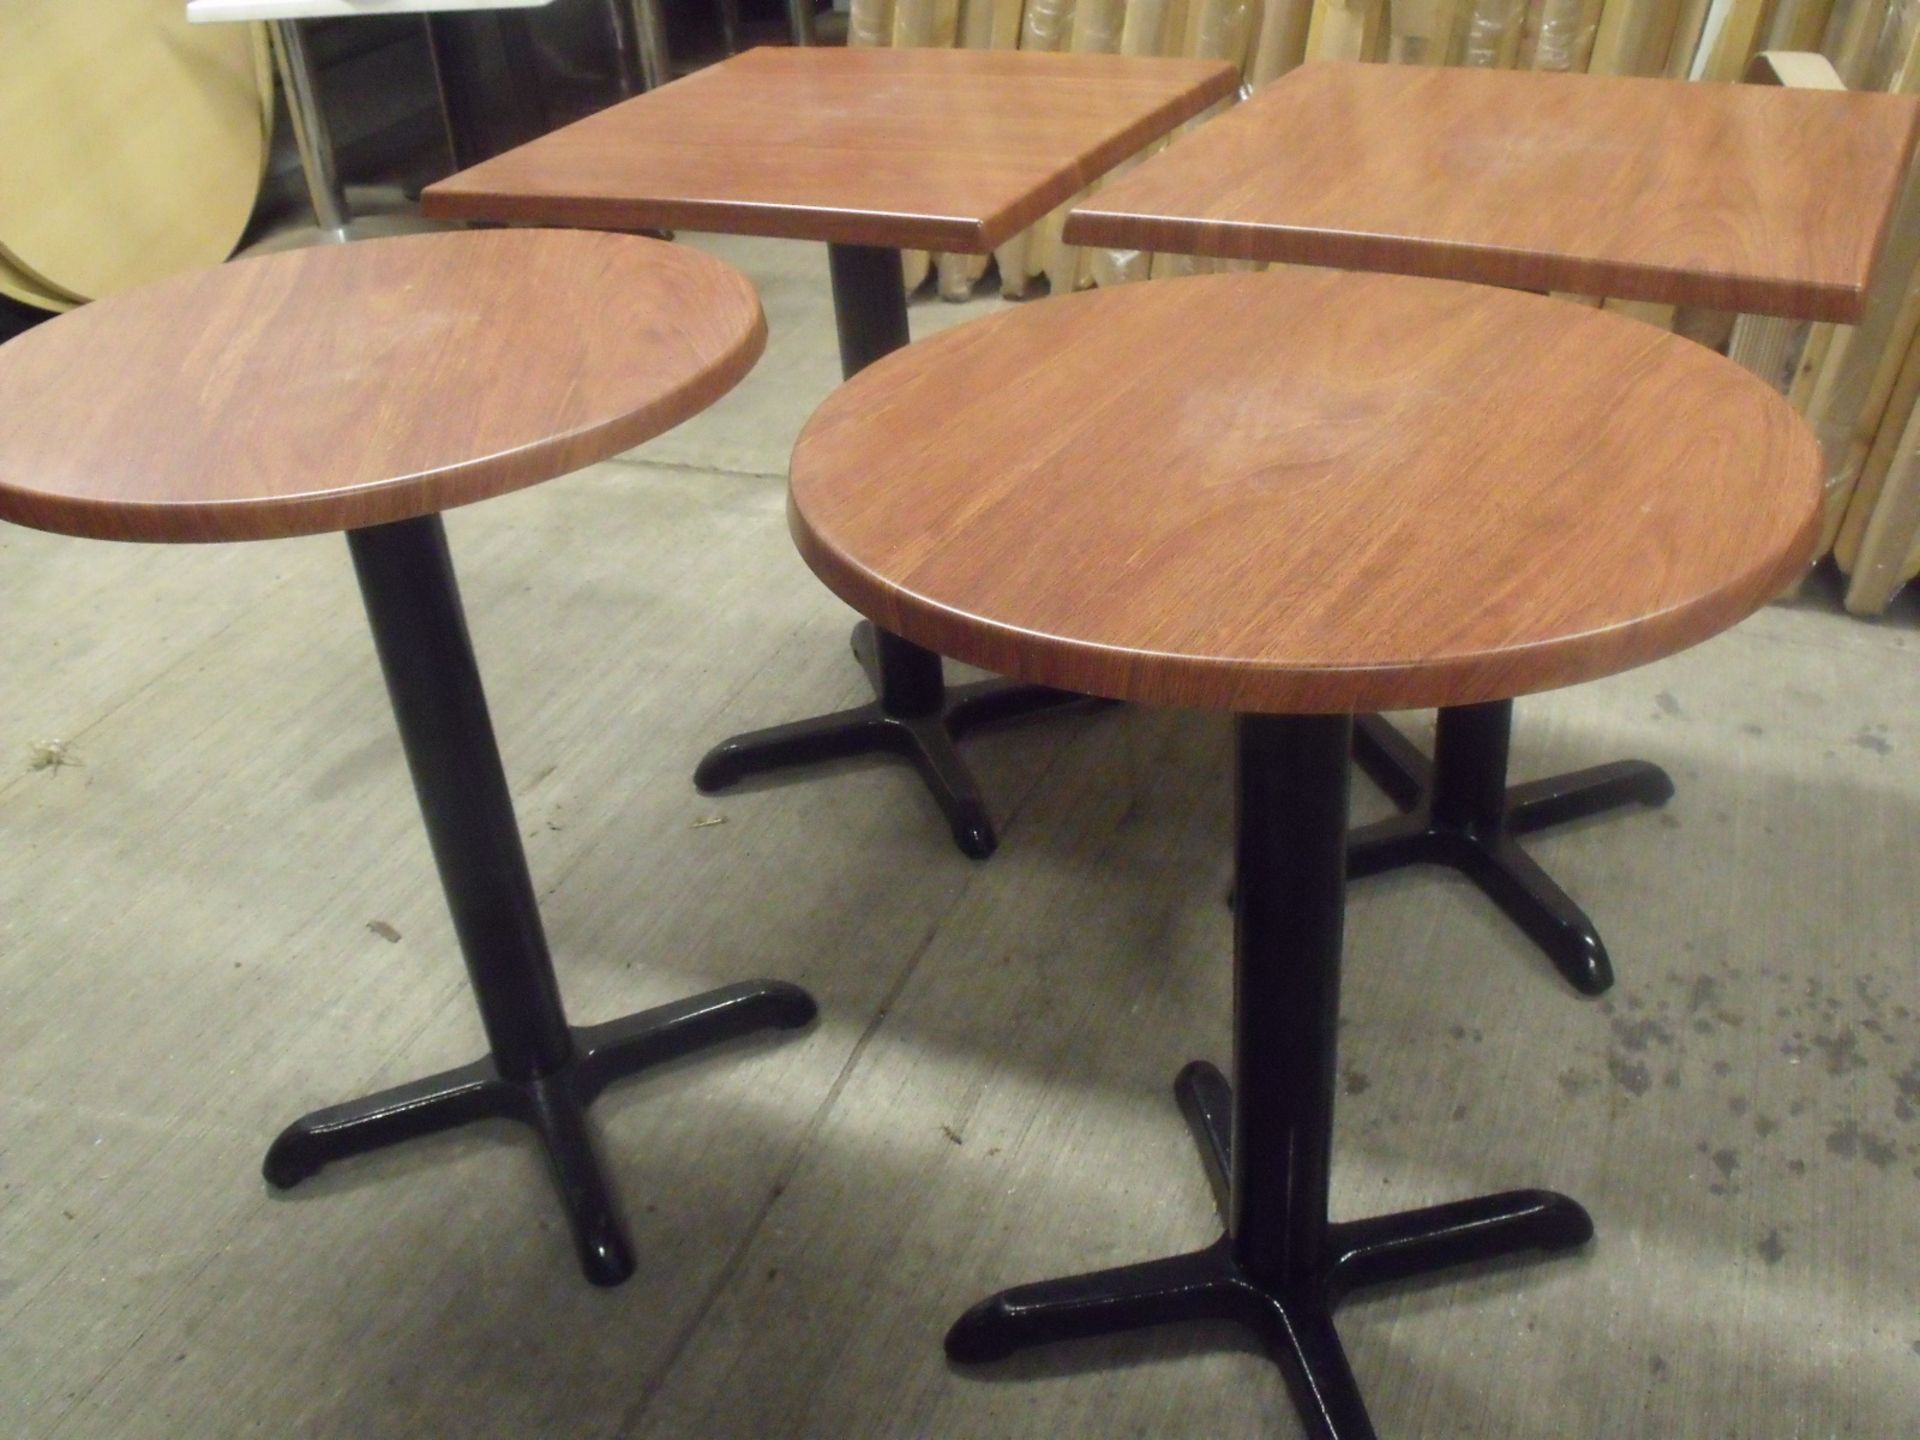 4 x bistro / café tables werzalit tops 2 x 600mm round and 2 x 600mm square with black cast iron